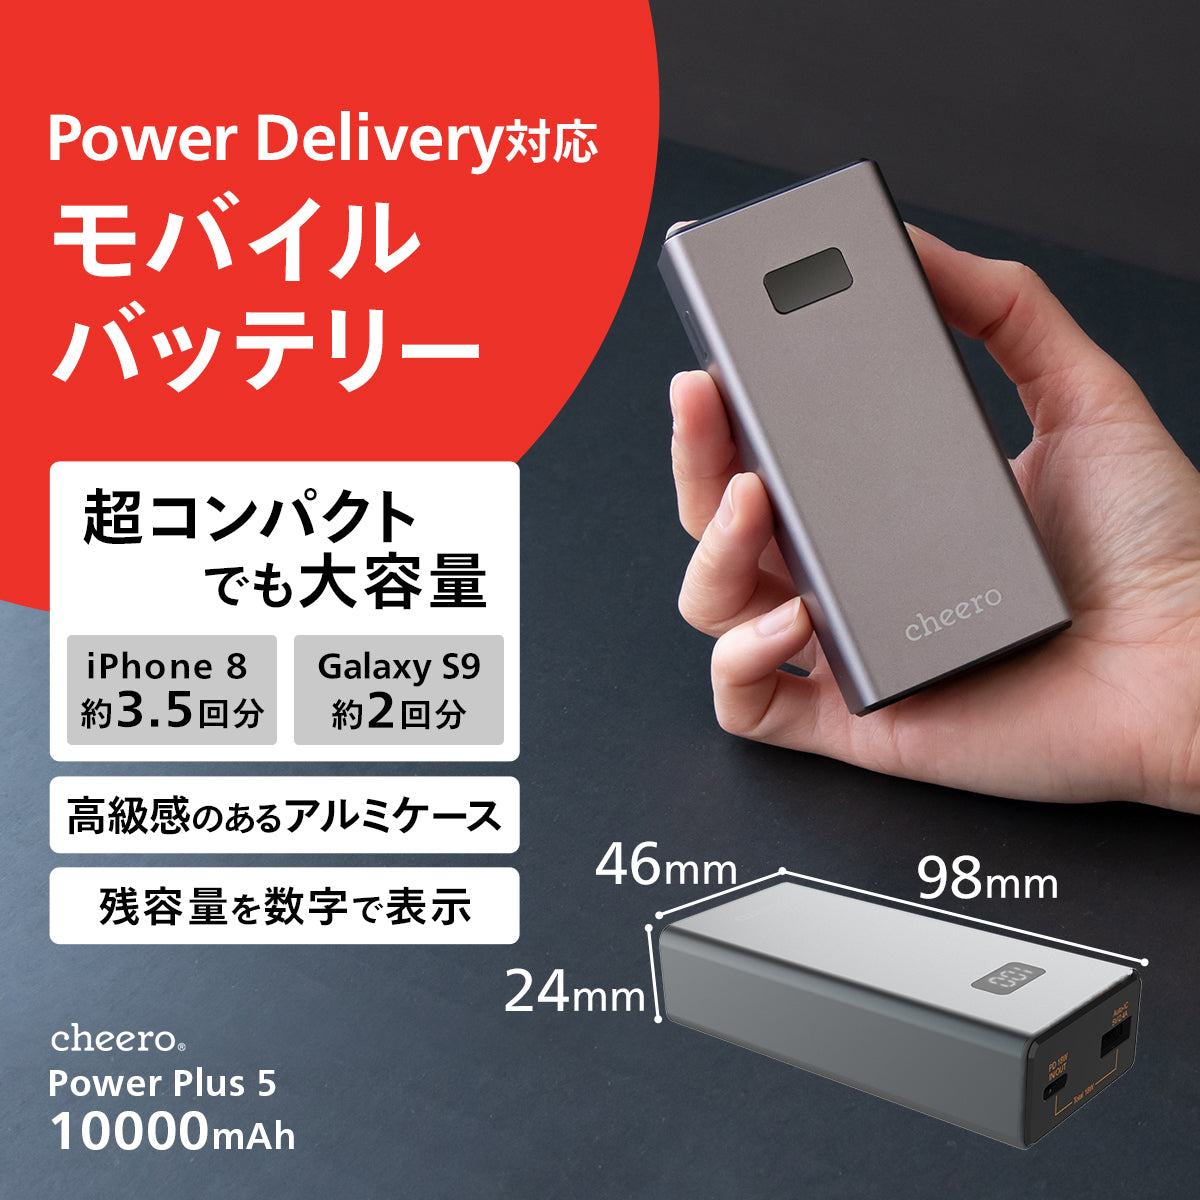 cheero Power Plus 5 10000mAh with Power Delivery 18W – cheero_official